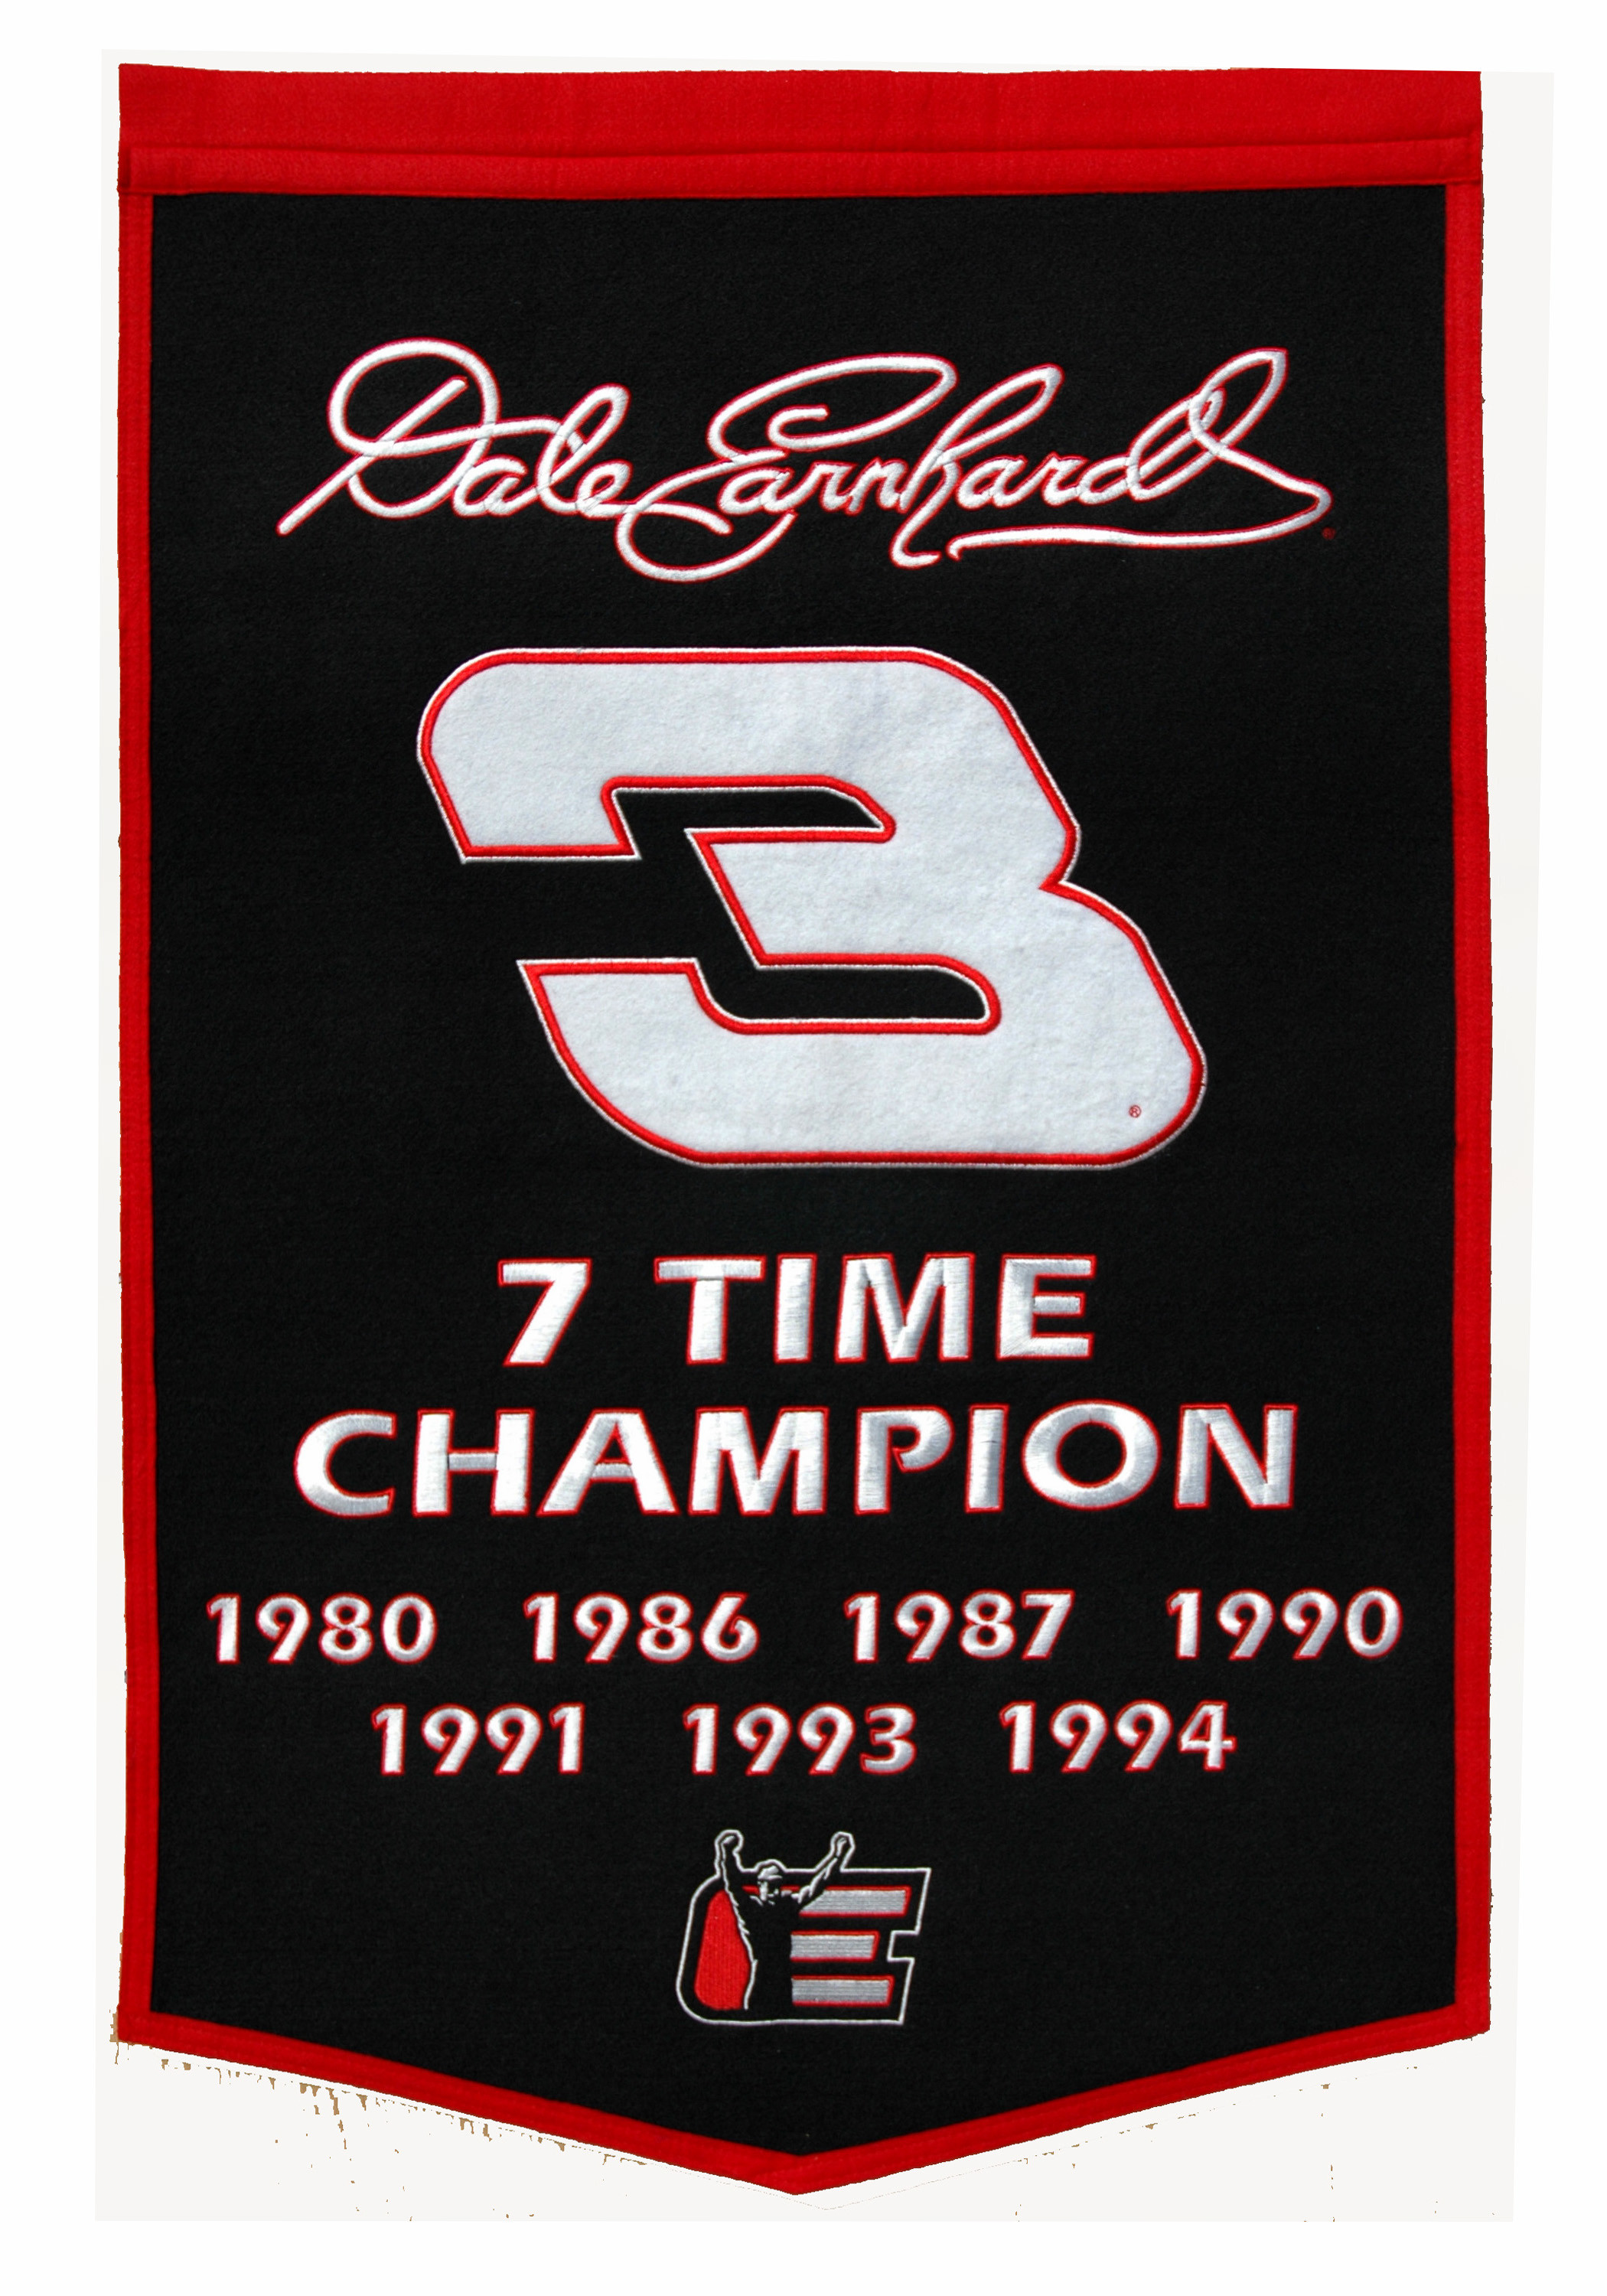 2100x3000 Dale Earnhardt Sr. 7 Time Cup Champion. Only one other driver can say that